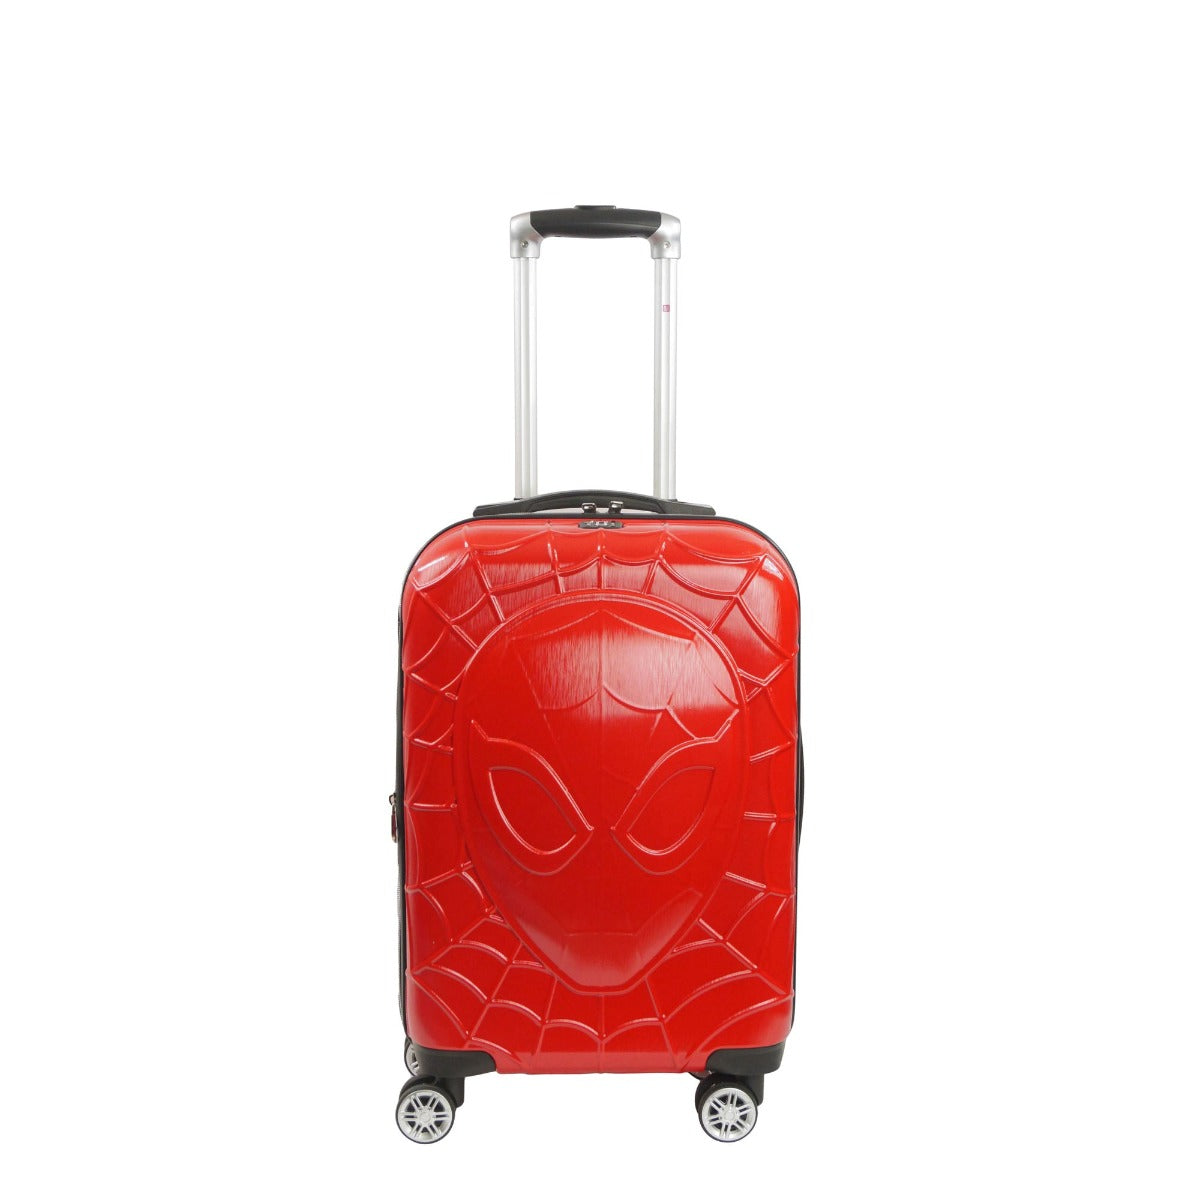 Spiderman Carry-on Hard-sided Spinner Suitcase 23" Luggage Red